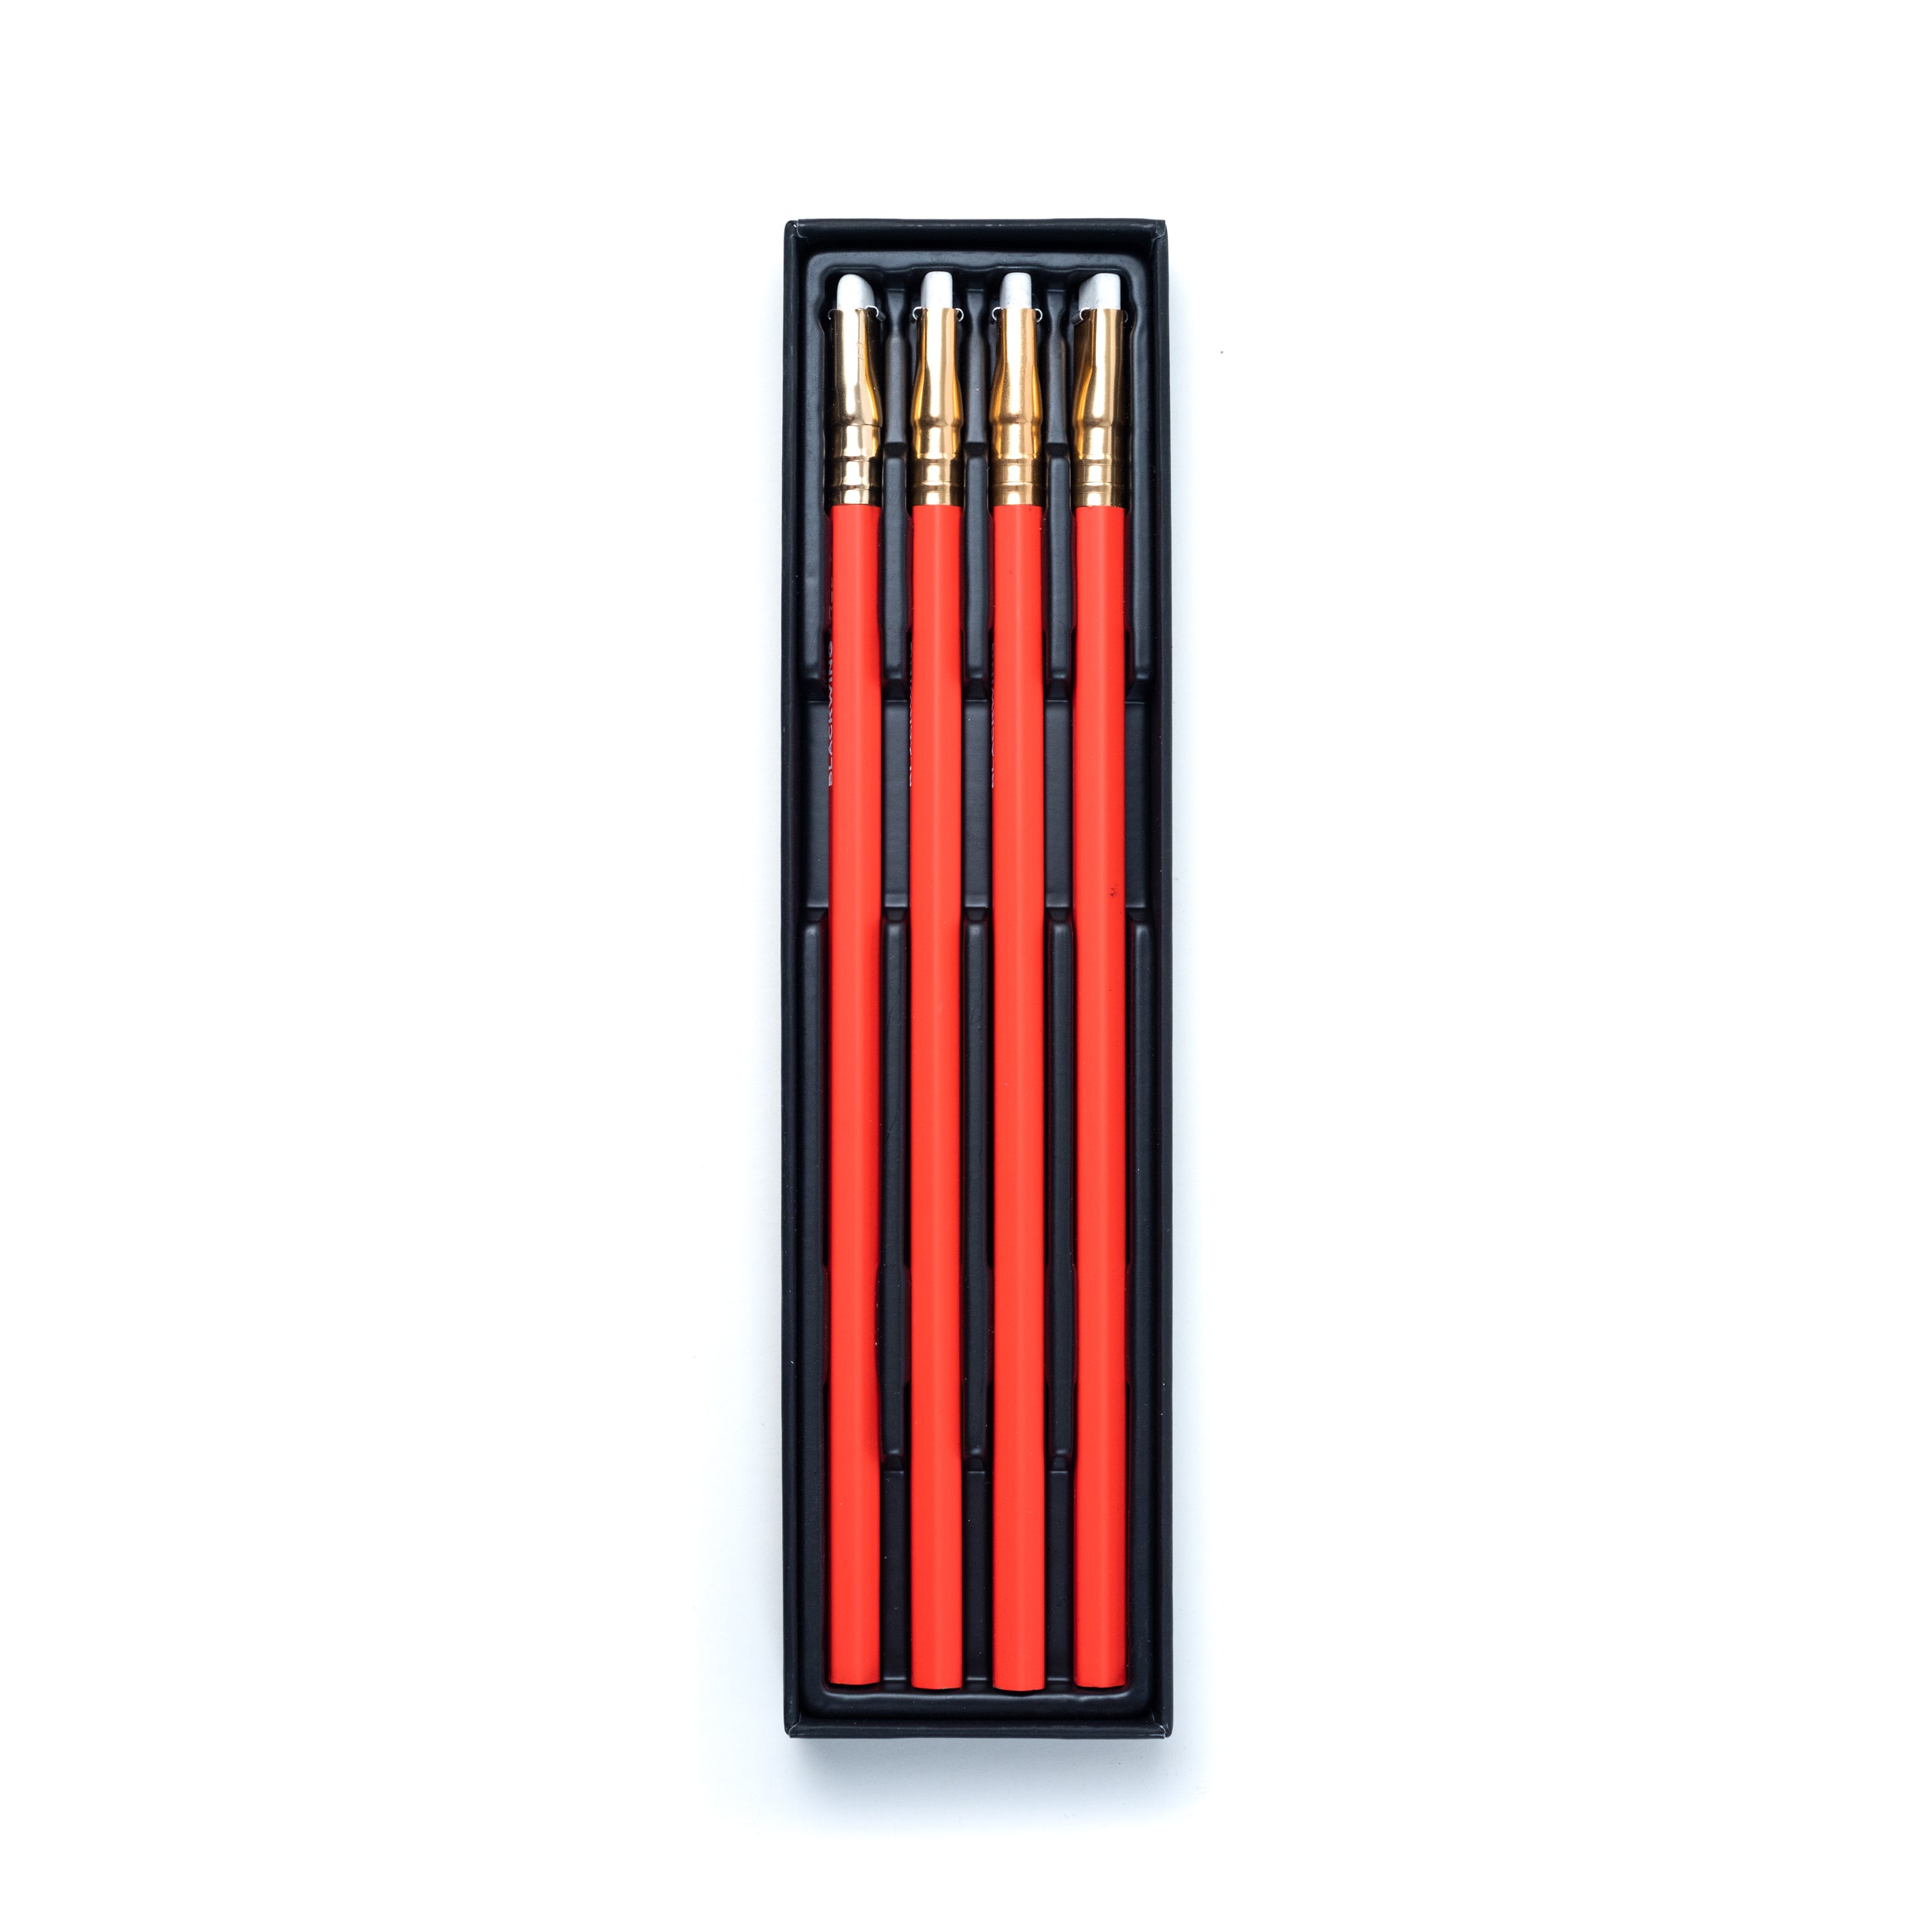 A set of Blackwing Red pencils in a black box, perfect for sketching or editing.